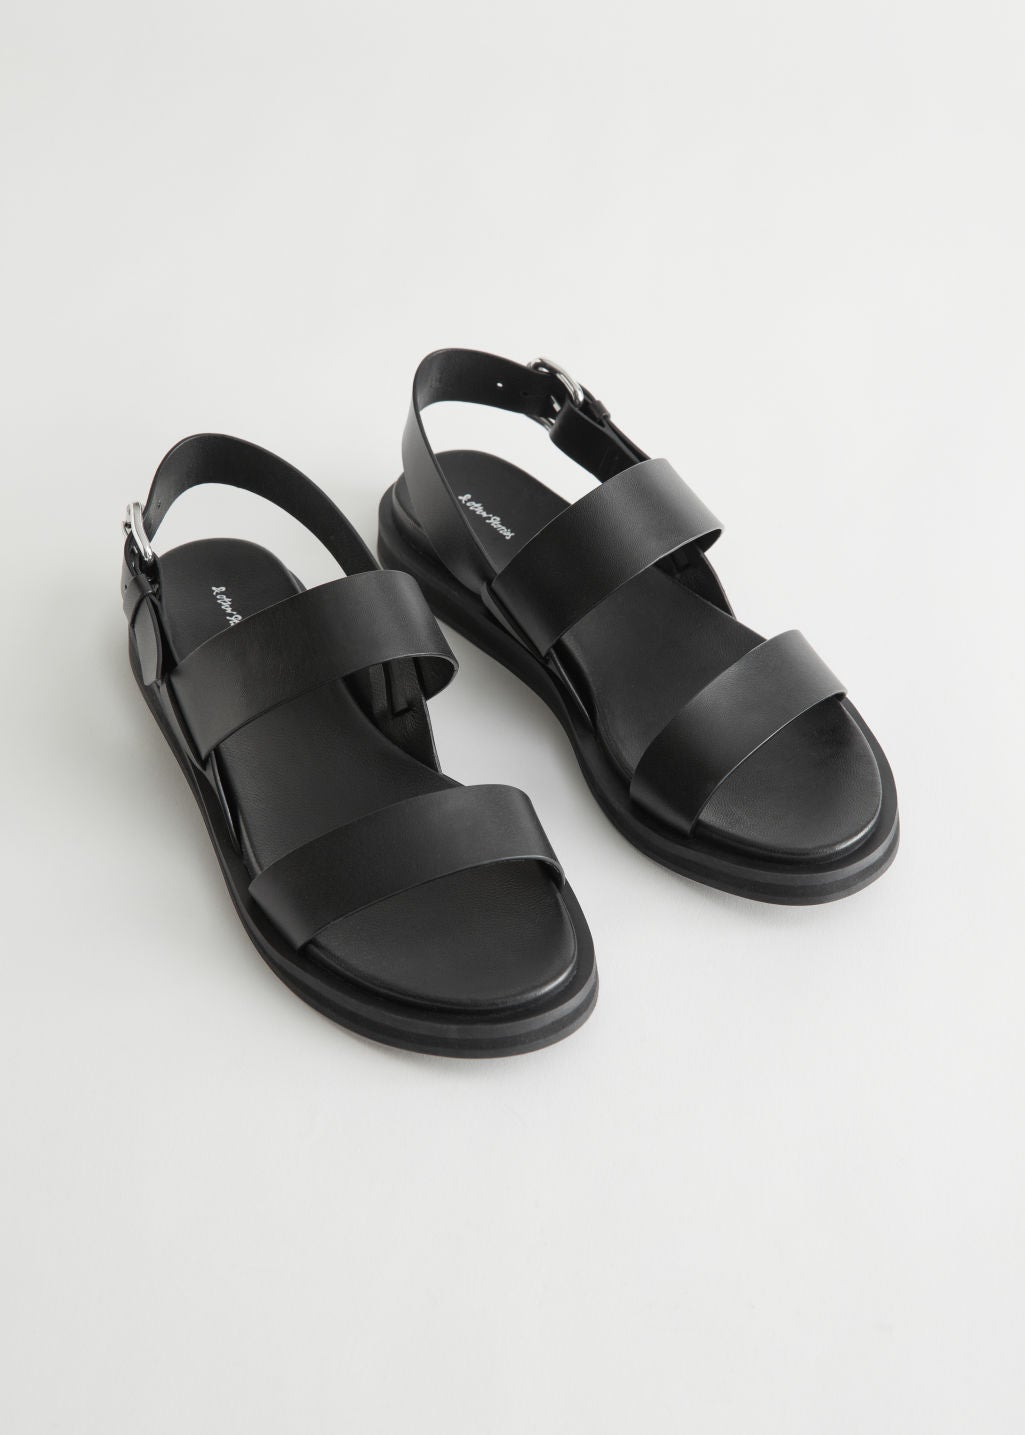 Other Stories + Diagonal Slingback Leather Sandals